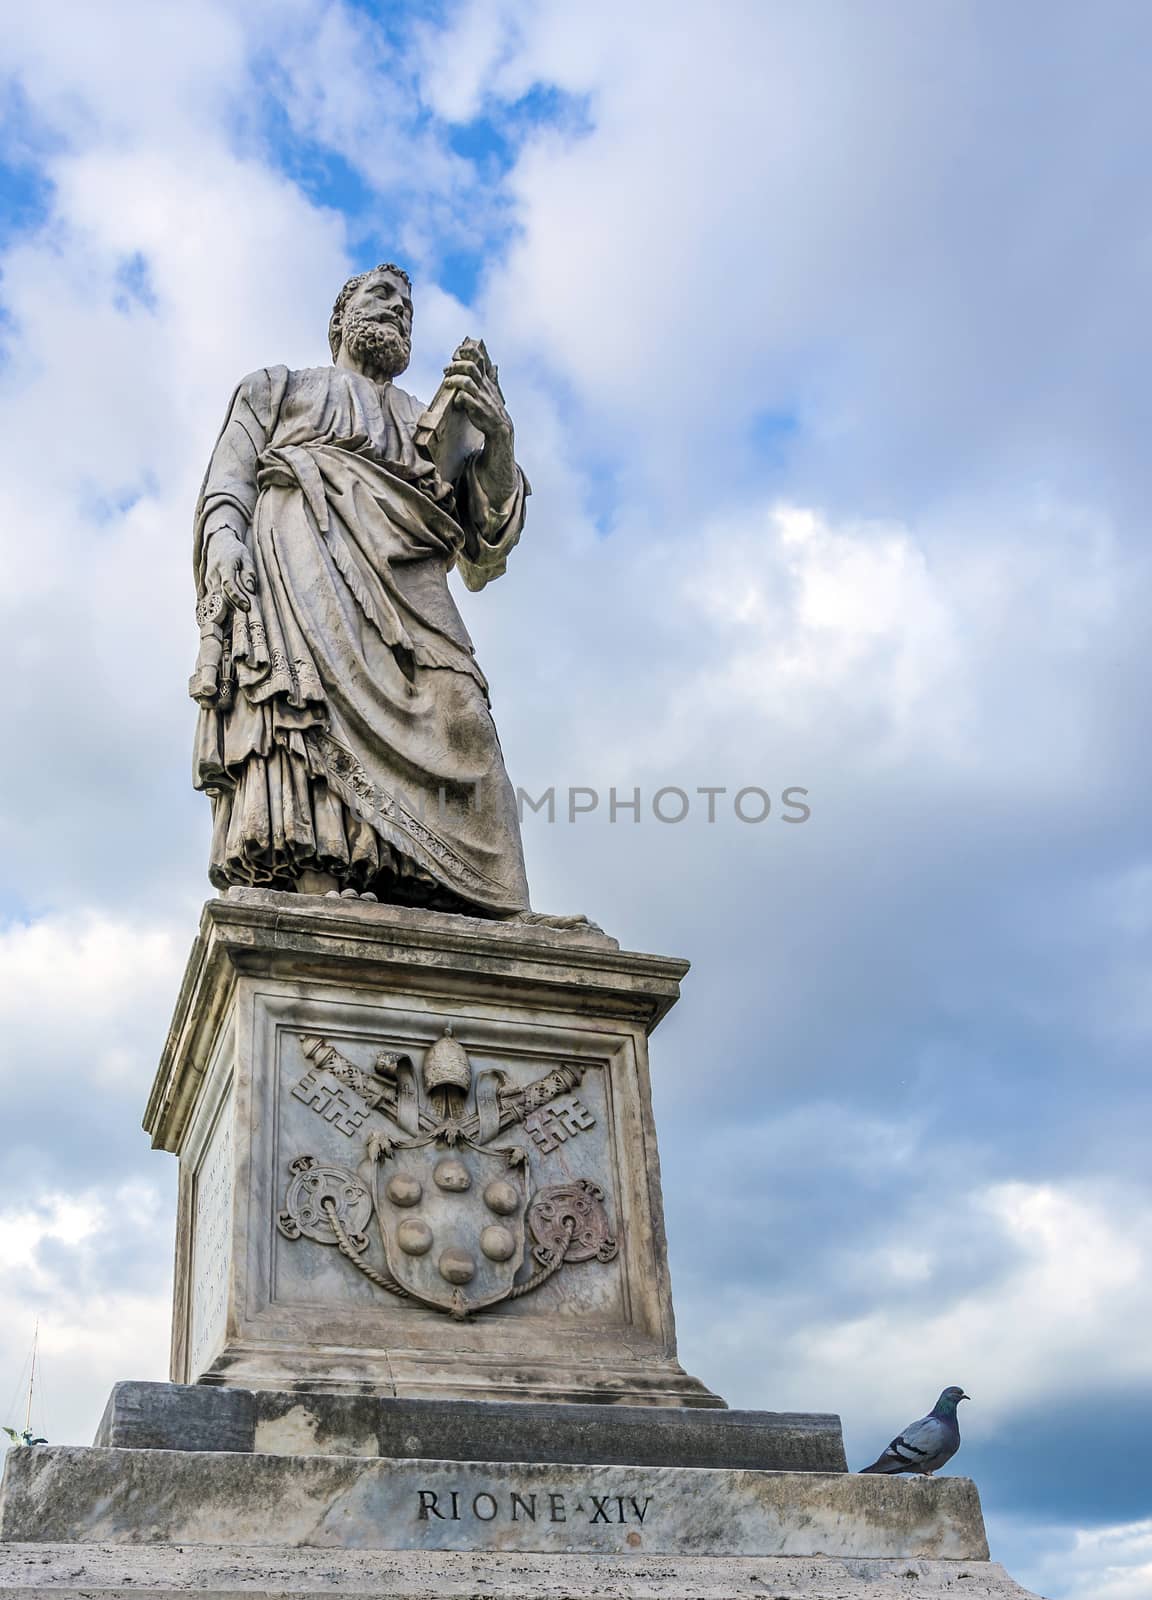 Statue of Apostle saint Peter on the Ponte Sant Angelo in Rome, Italy in a cloudy day